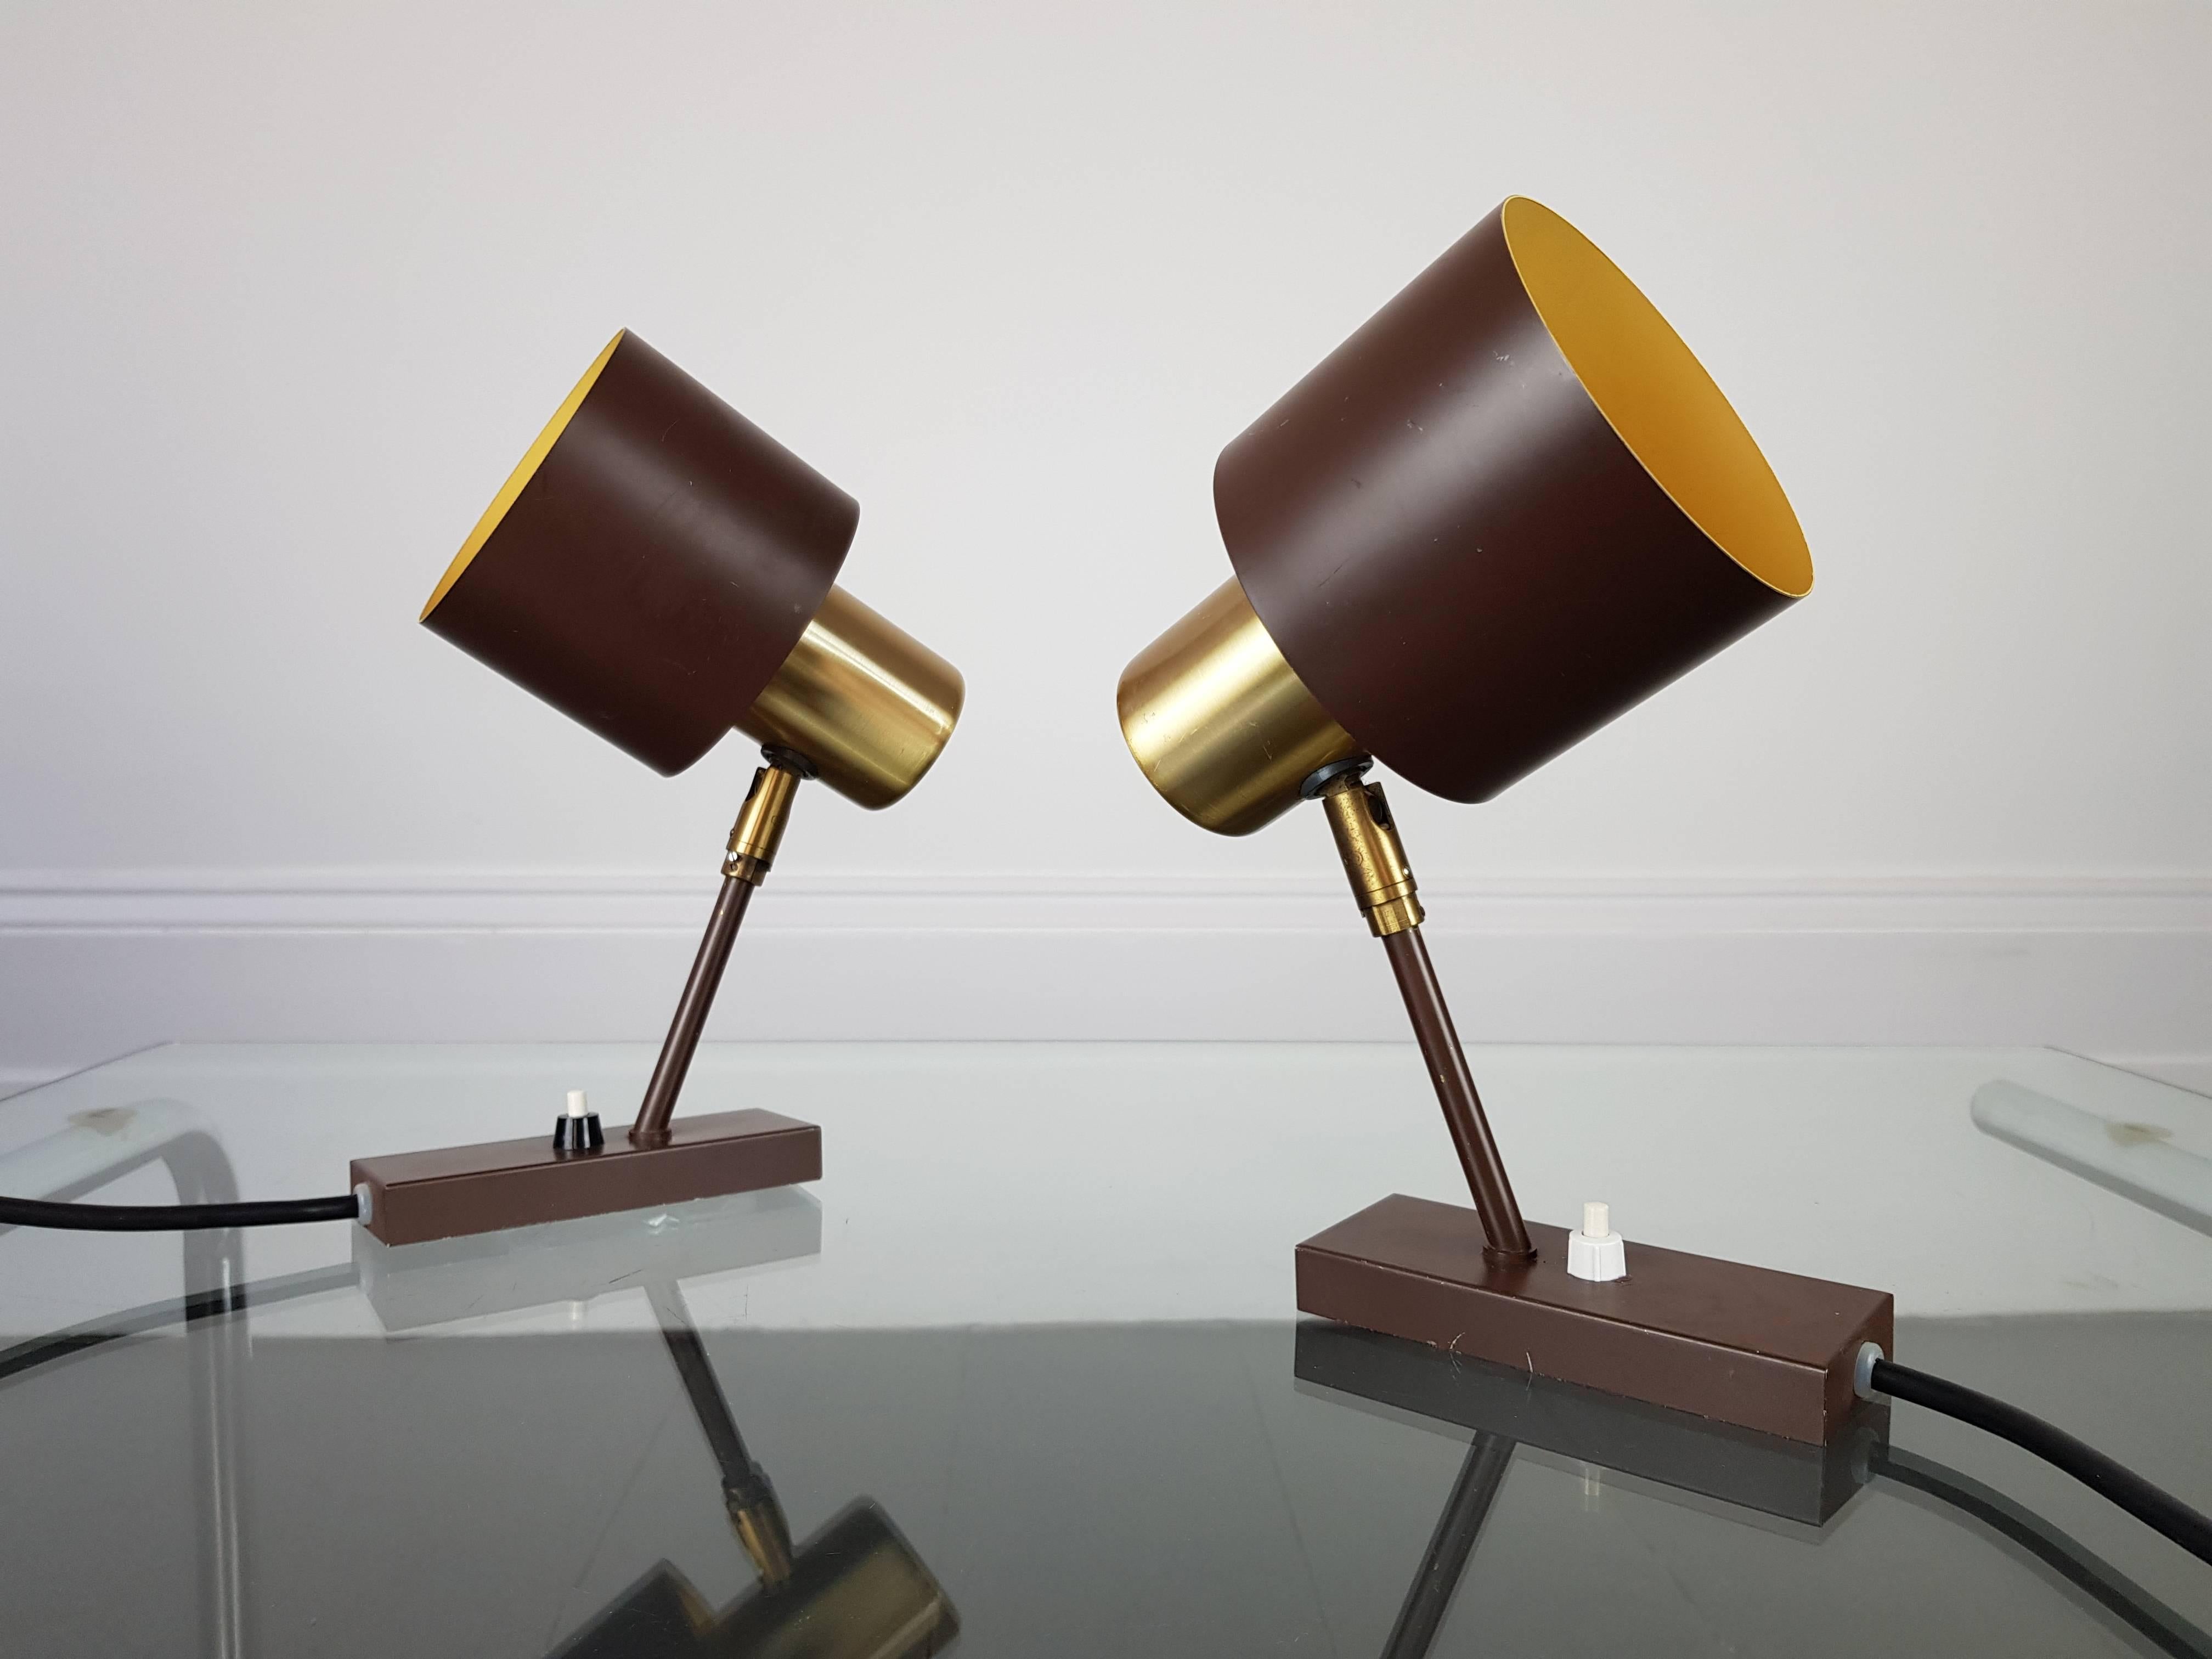 A set of two model Alfa wall sconces designed by Jo Hammerborg in 1966 and produced by Fog & Mørup in Denmark.
 
Made of brass, adjustable and have a distance of 24cm to the wall. 

In 1957 Hammerborg became head of design at Fog & Mørup. His